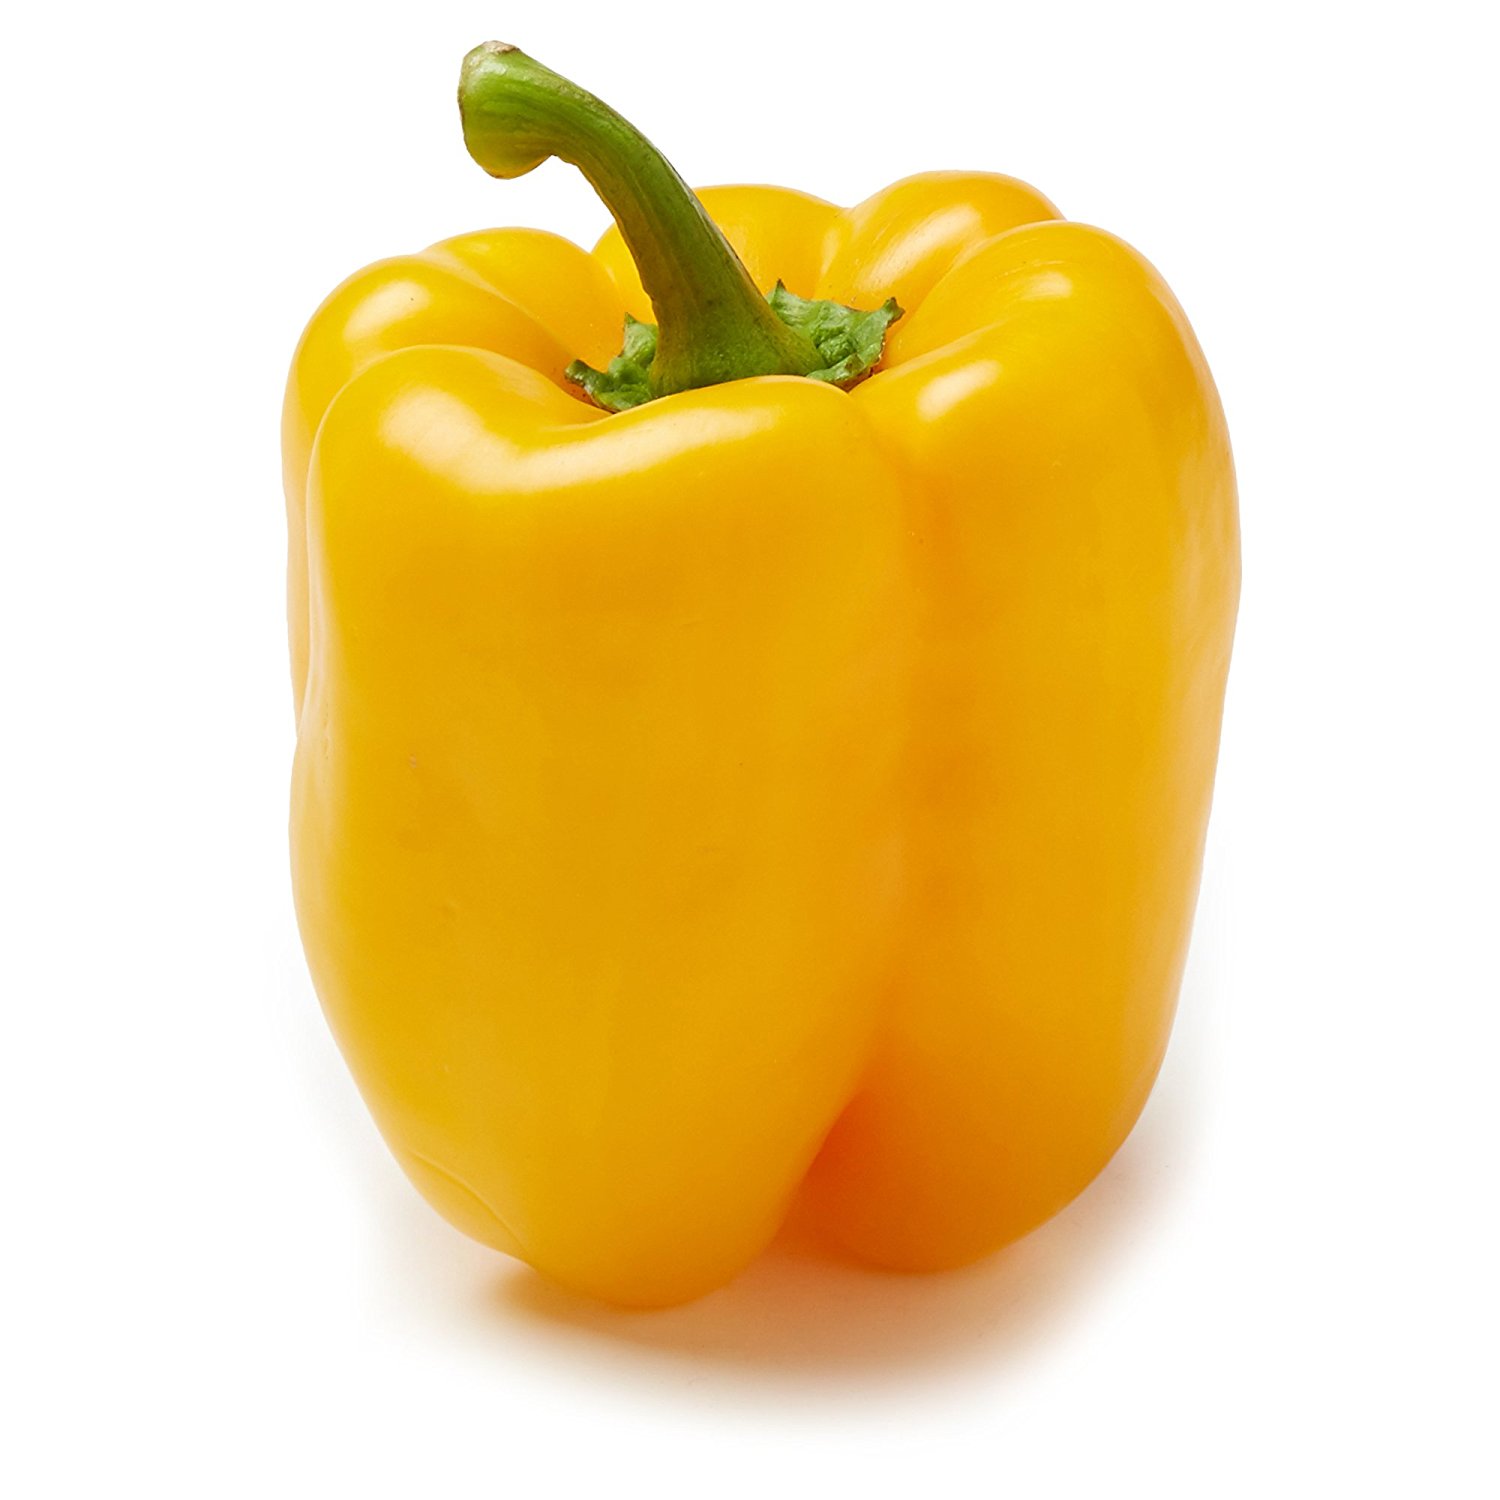 Greenhouse Grown Yellow Bell Pepper, One Large: Amazon.com: Grocery ...